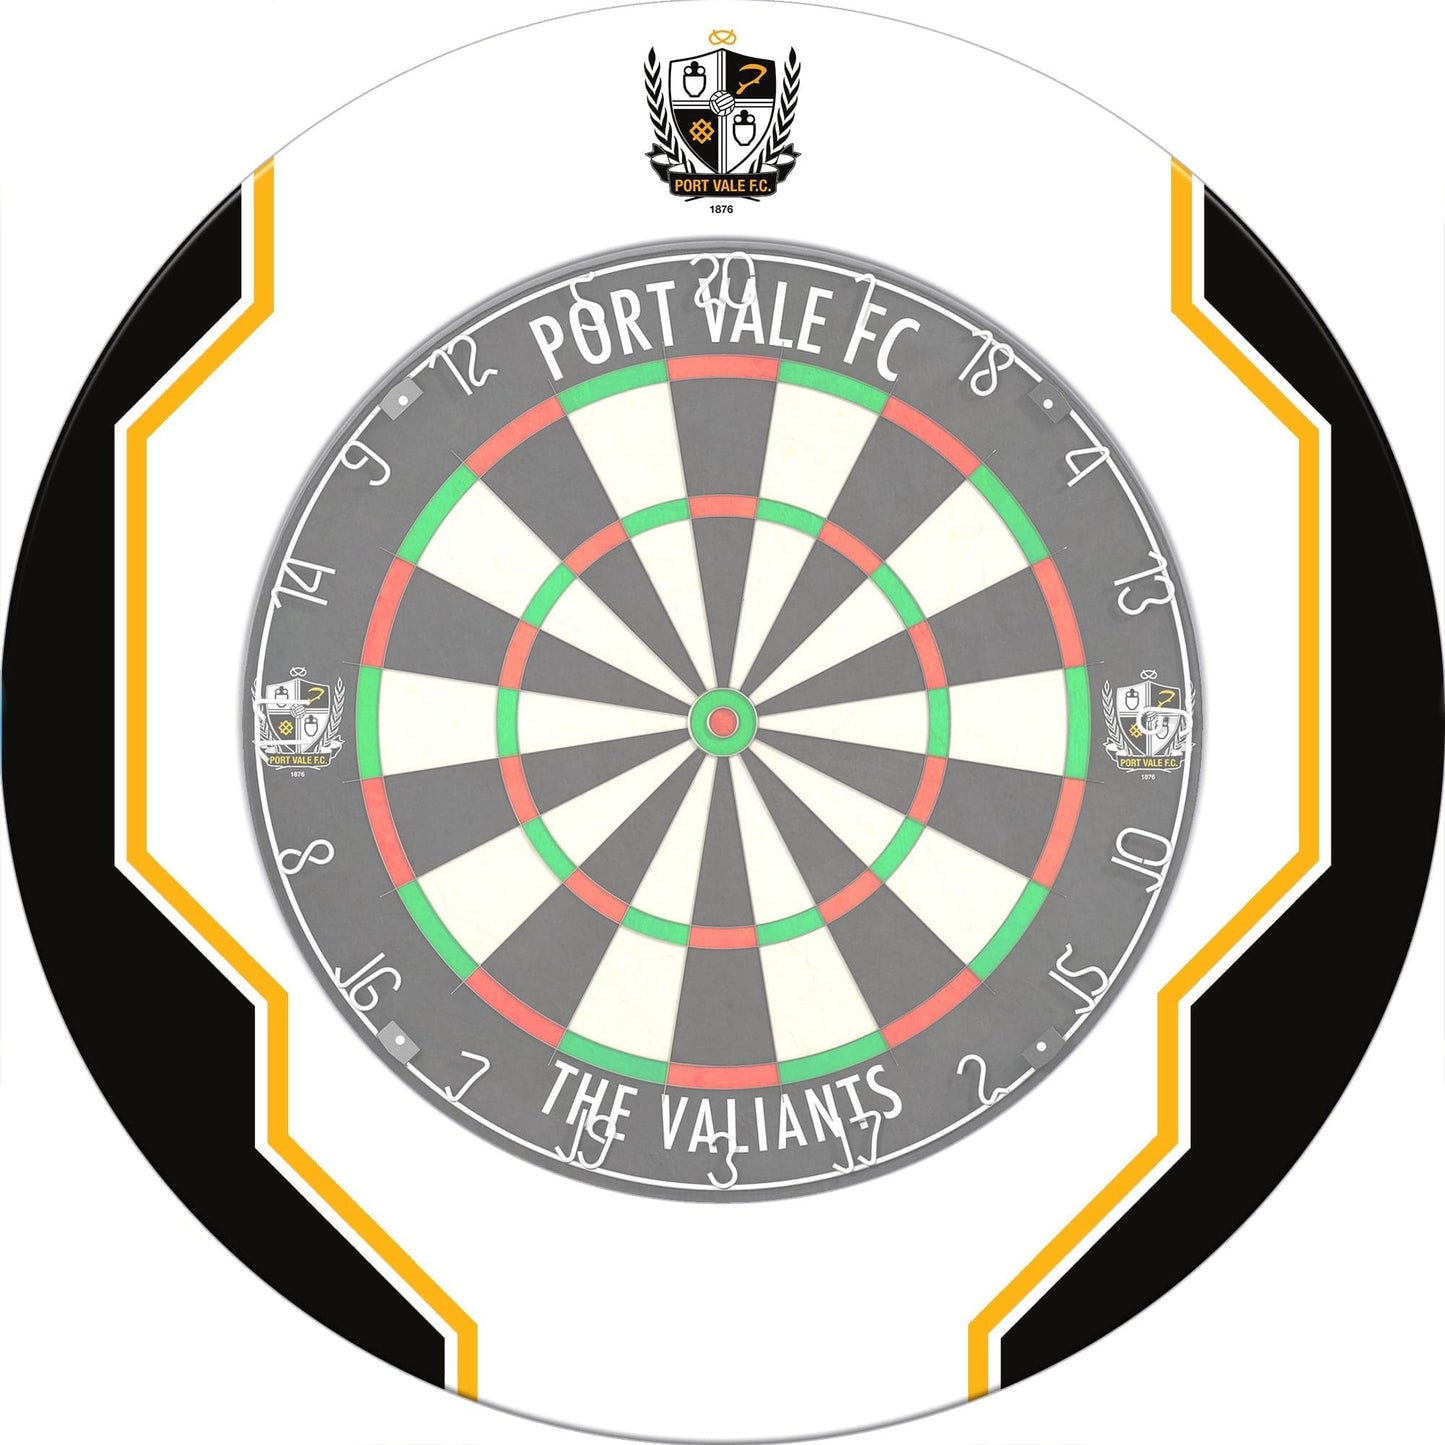 Cardiff City FC - Official Licensed - Professional Dartboard - Crest a